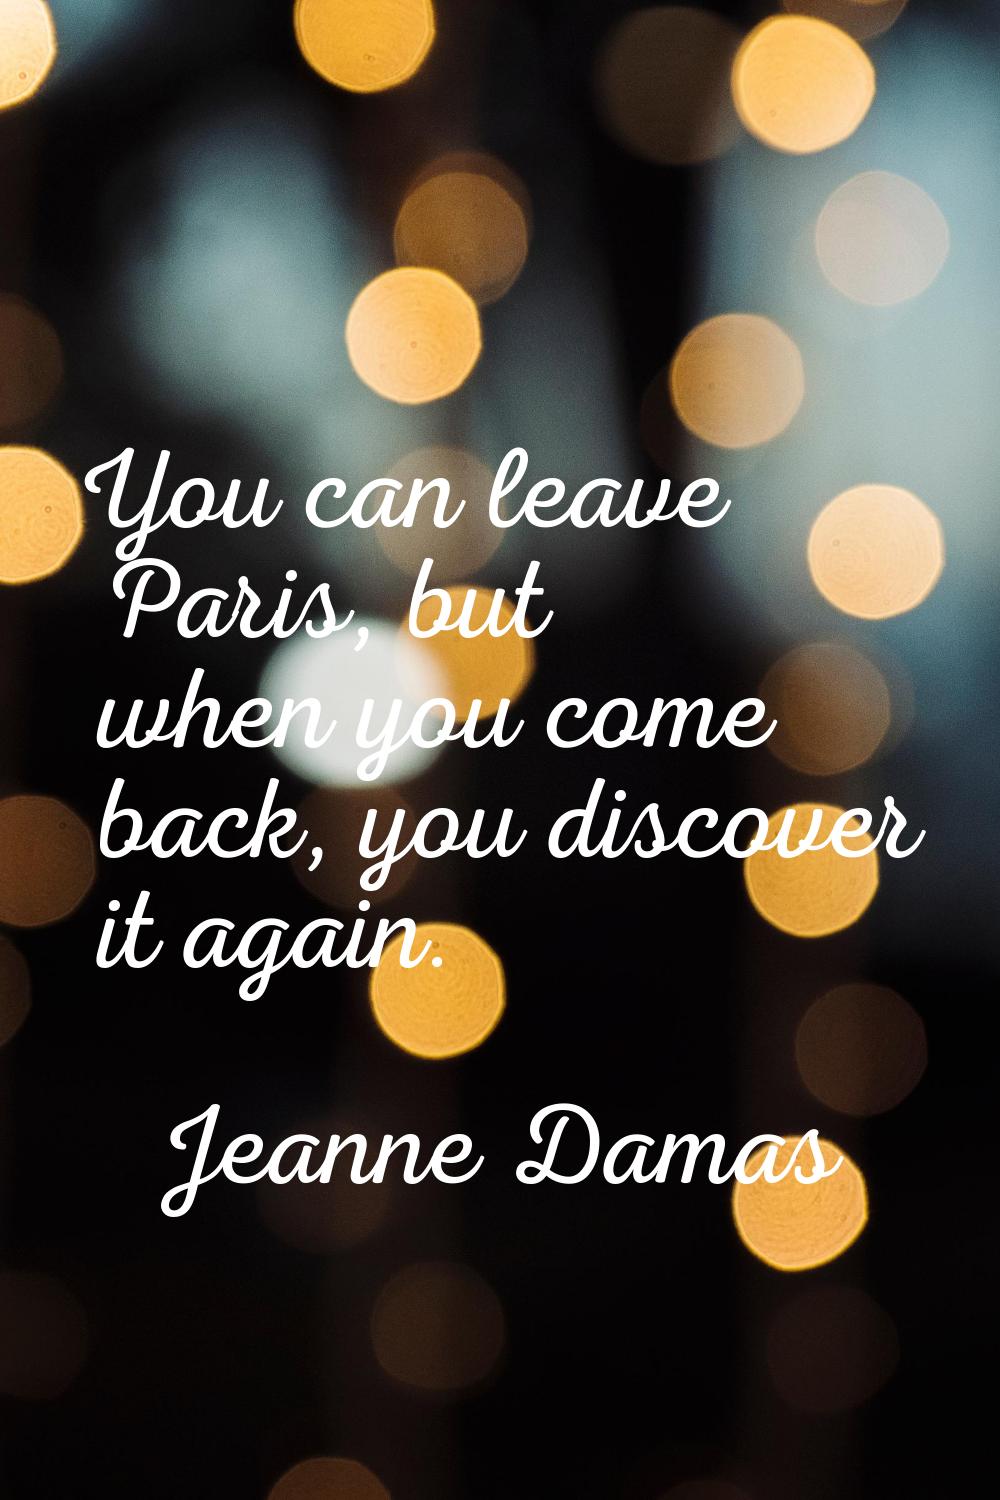 You can leave Paris, but when you come back, you discover it again.